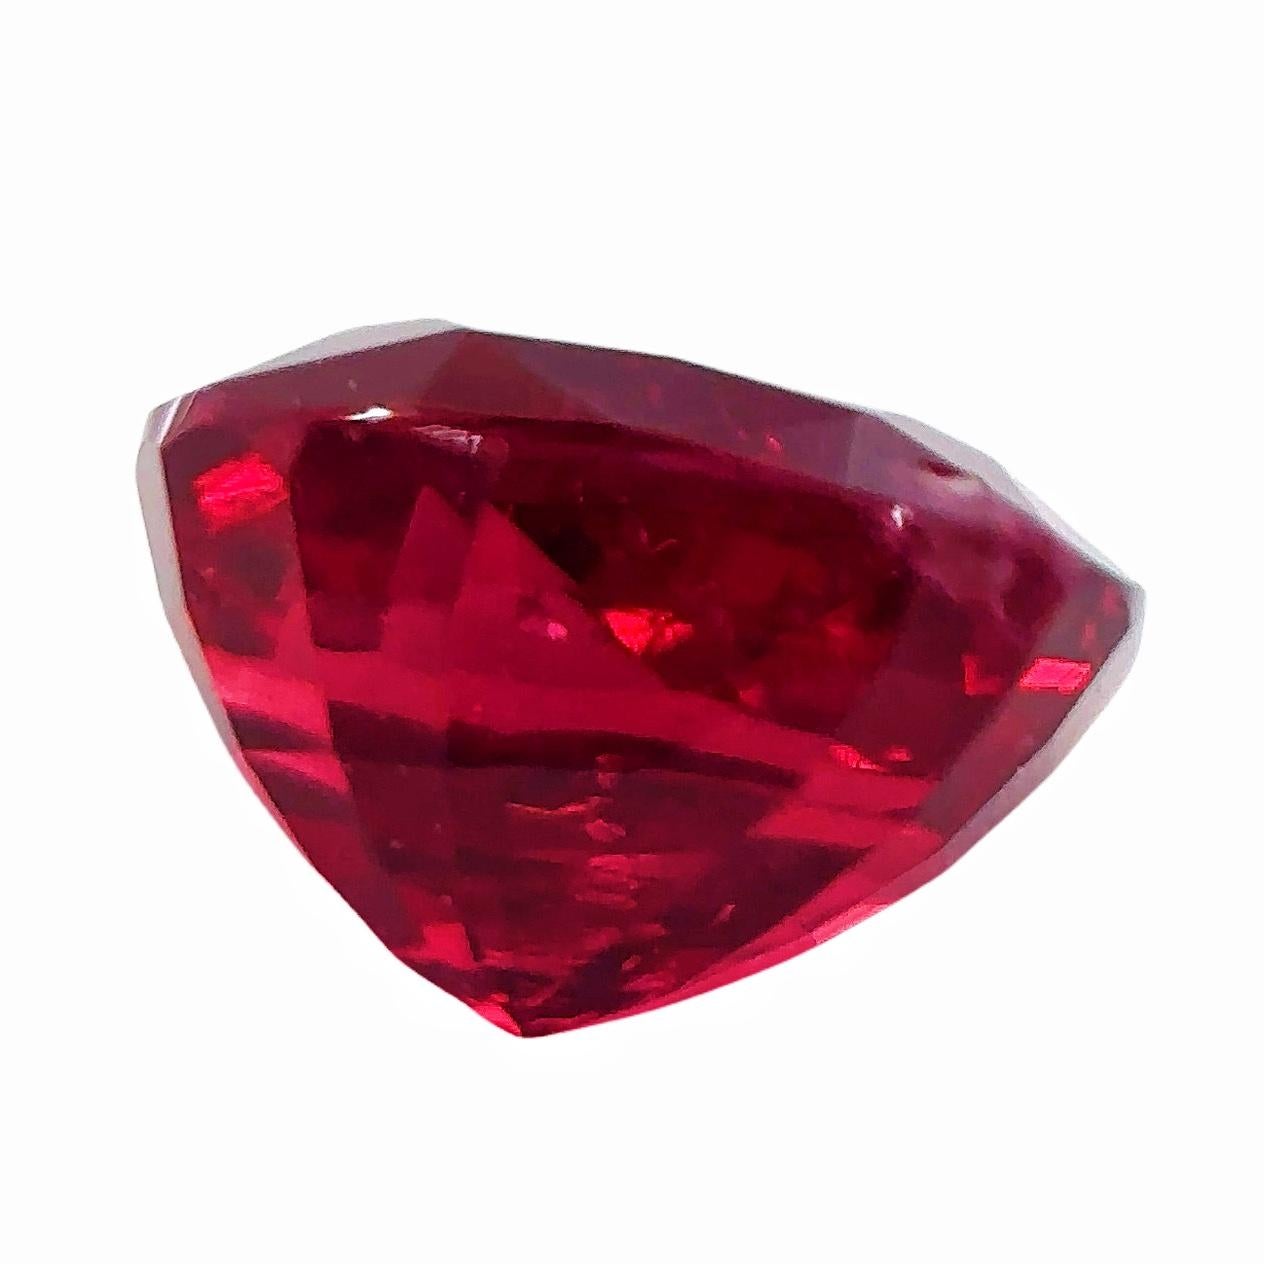 Gubelin Certified  2.01 Carat Unheated Natural Mogok Burma Ruby Loose Stone

Come with a Gubelin lab report.

This Item is ideal for your design as an engagement ring, cocktail ring, necklace, bracelet, etc.


ABOUT US

Xuelai Jewellery London is a